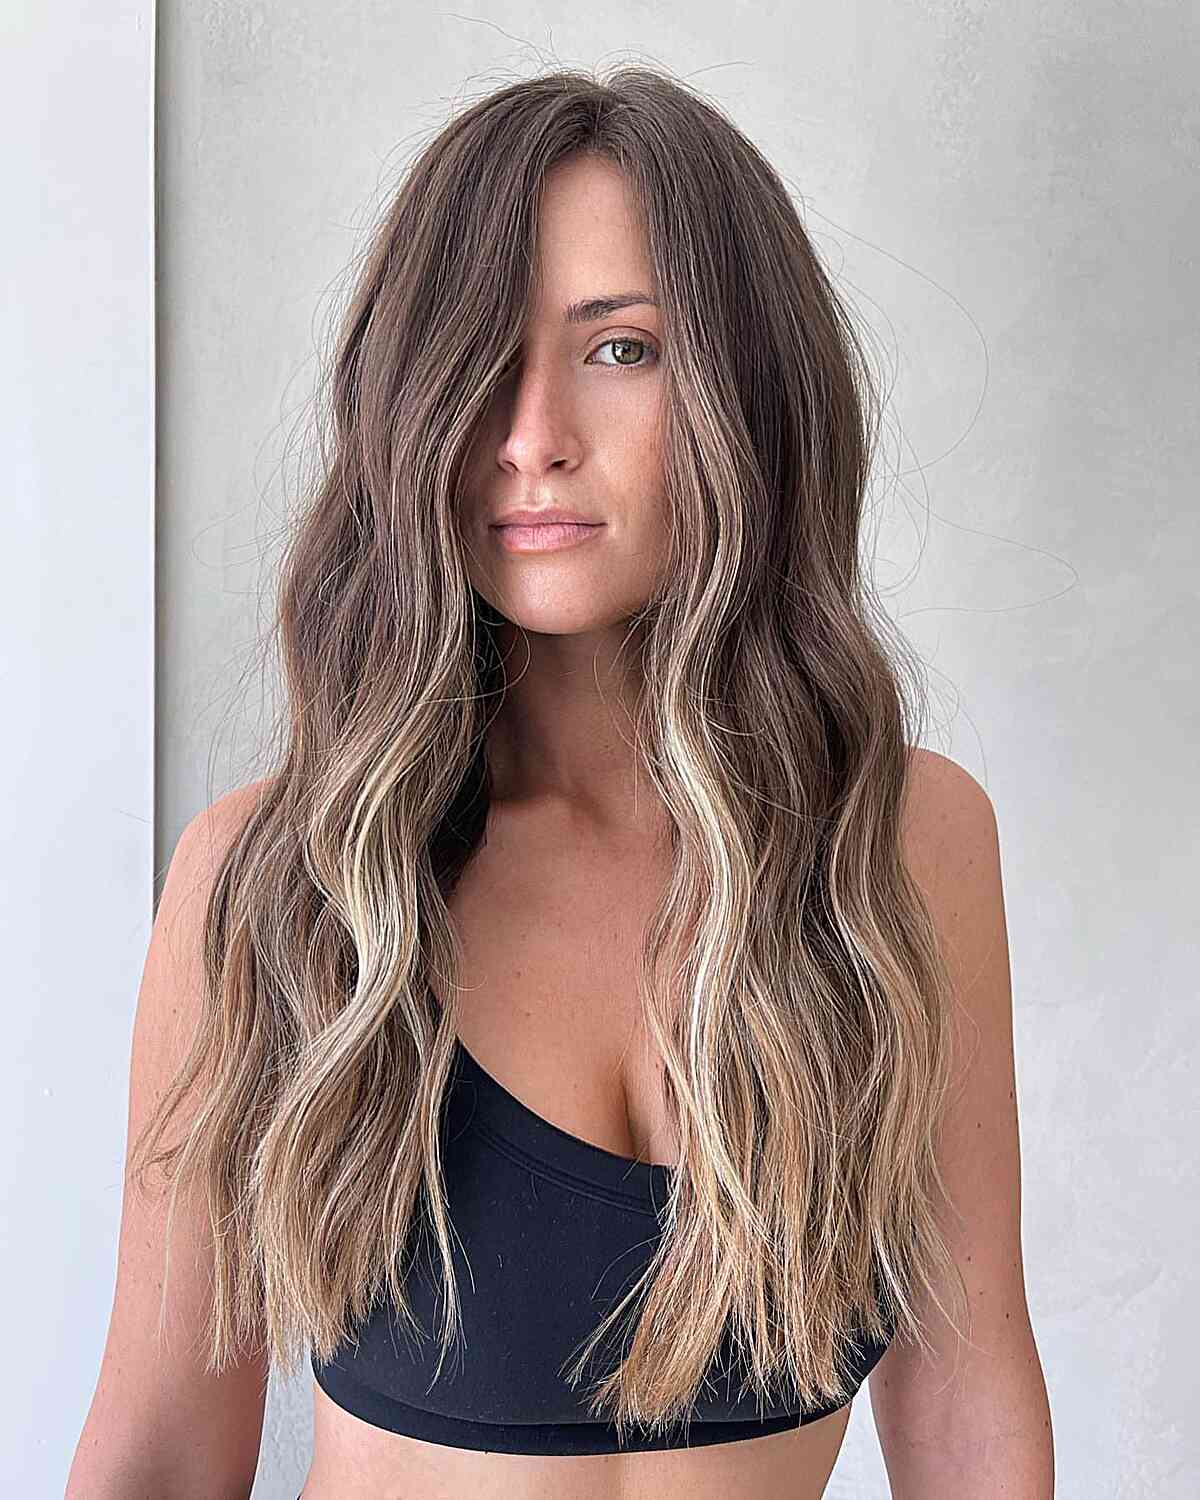 Soft Face Frame and Long Loose Beach Waves